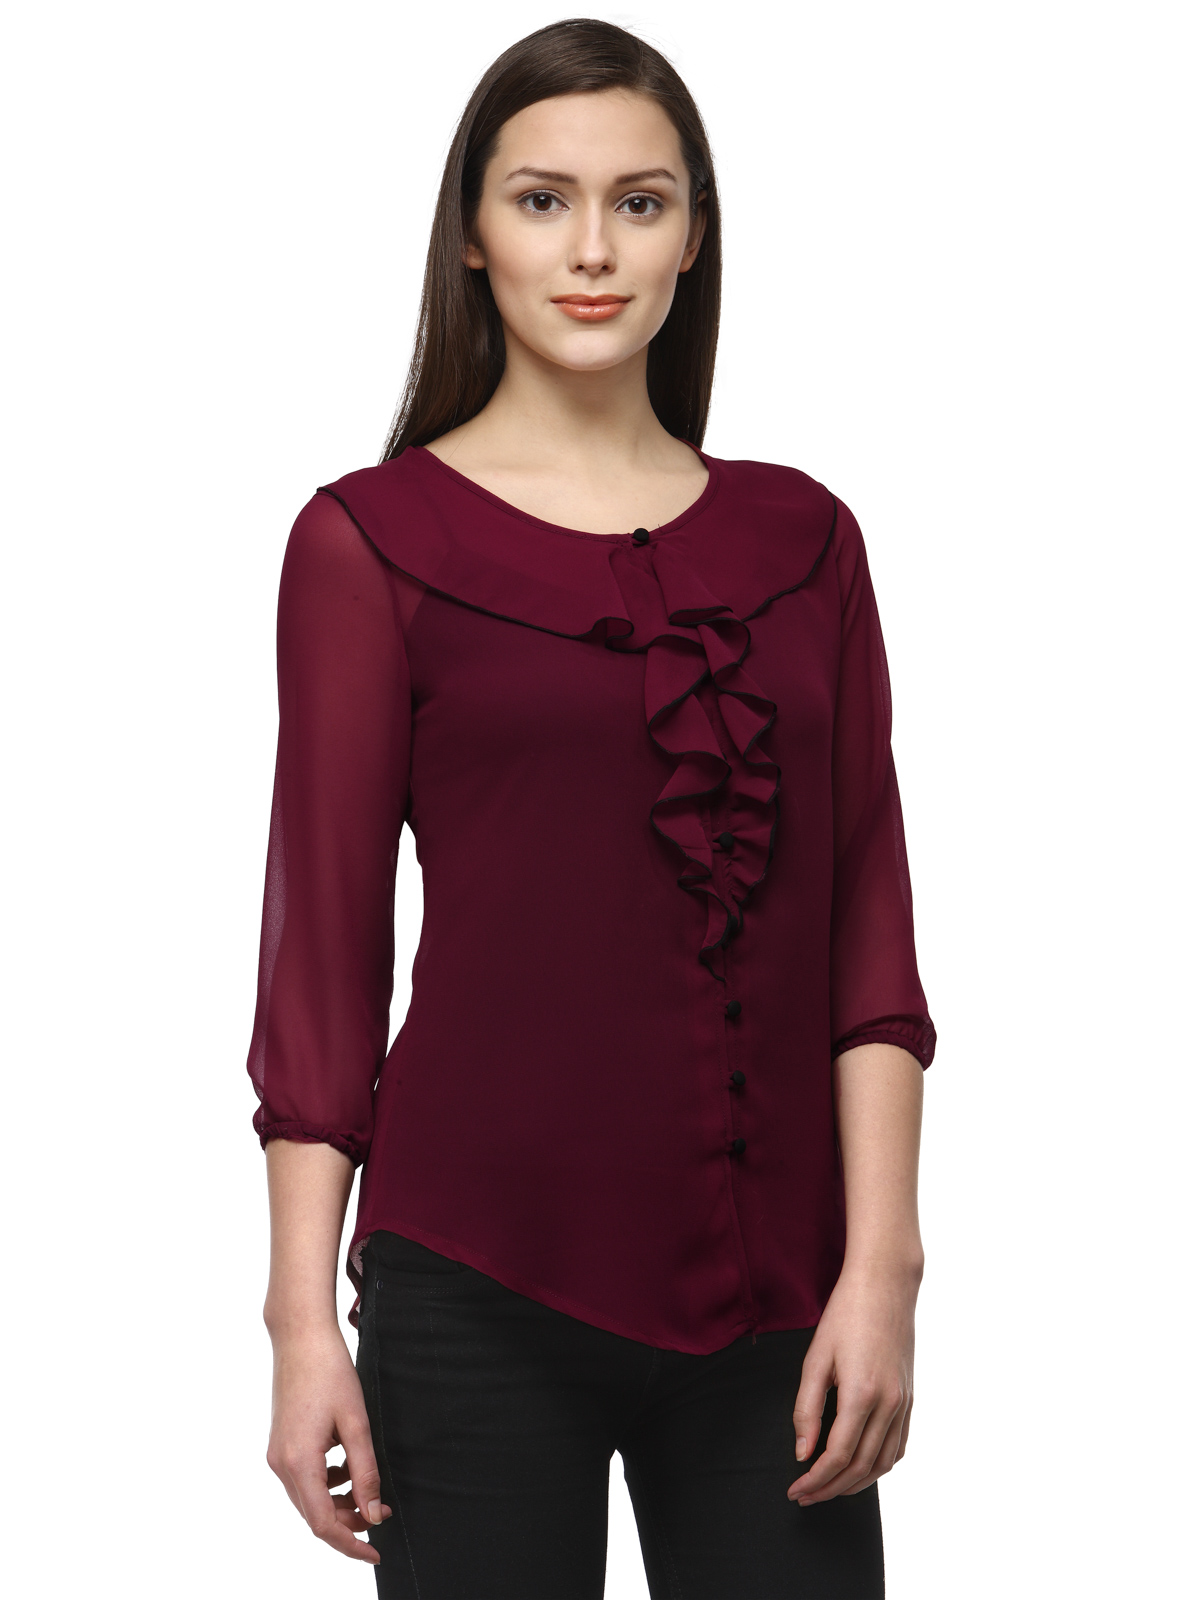 Buy Tunic Nation Women's Wine 100 Polyester Frill Top Online @ ₹449 ...